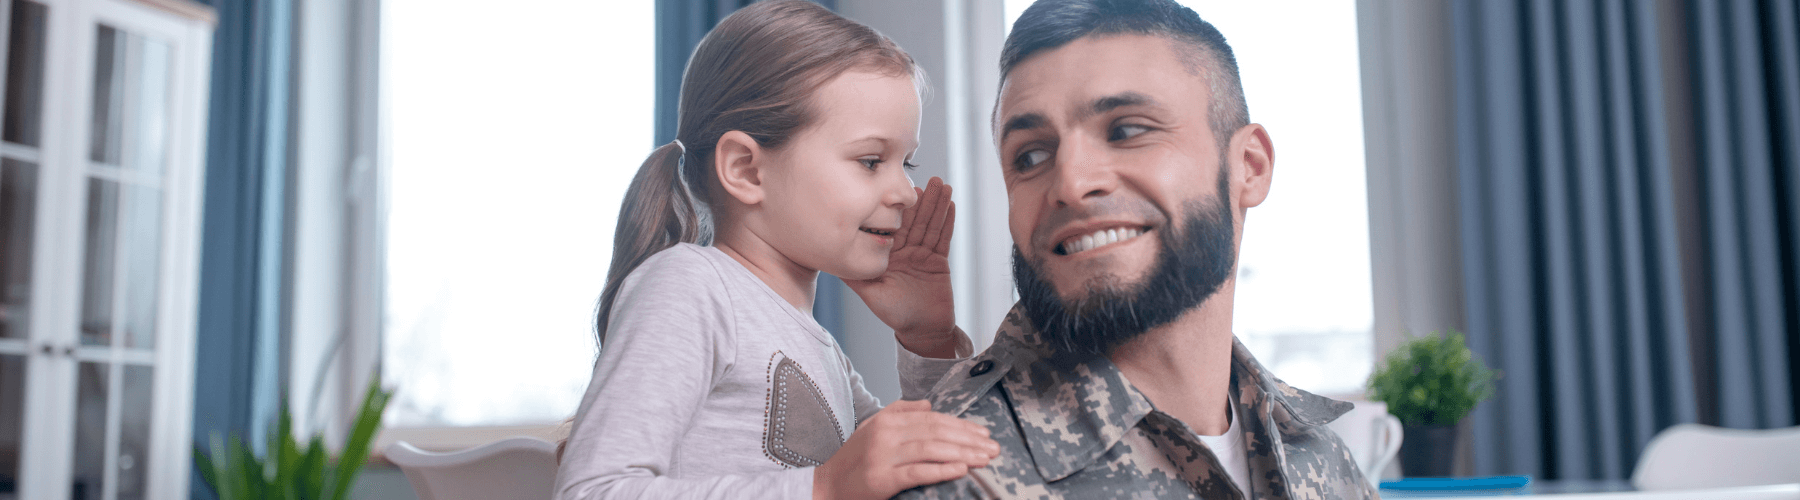 little girl whispering into military dad's ear